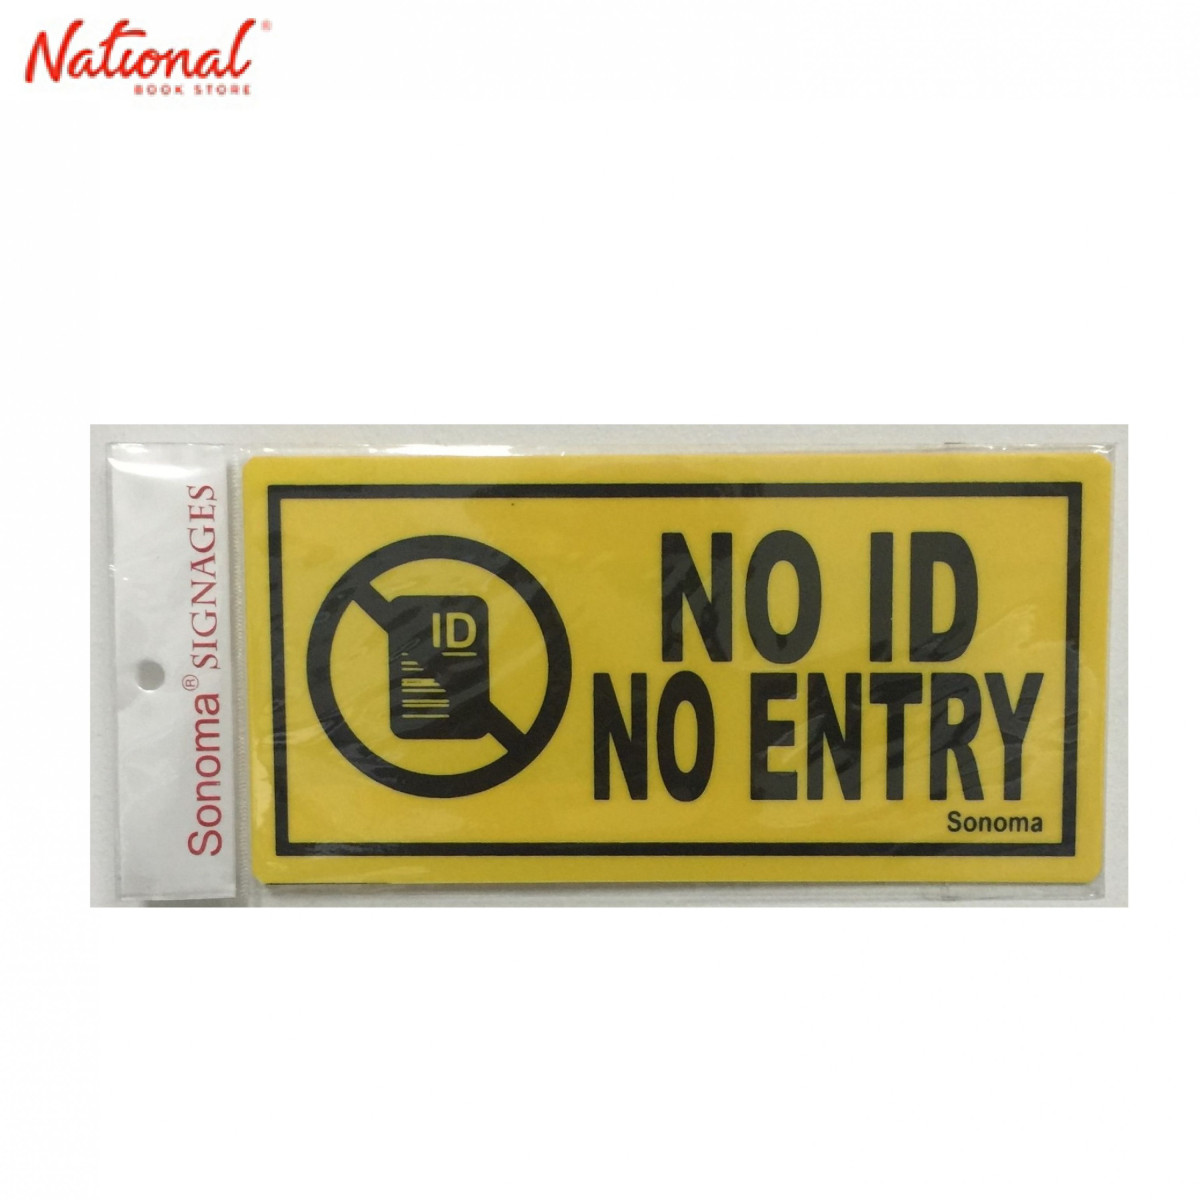 Sonoma Signage 4x8 Inches Yellow No Id No Entry Office Business